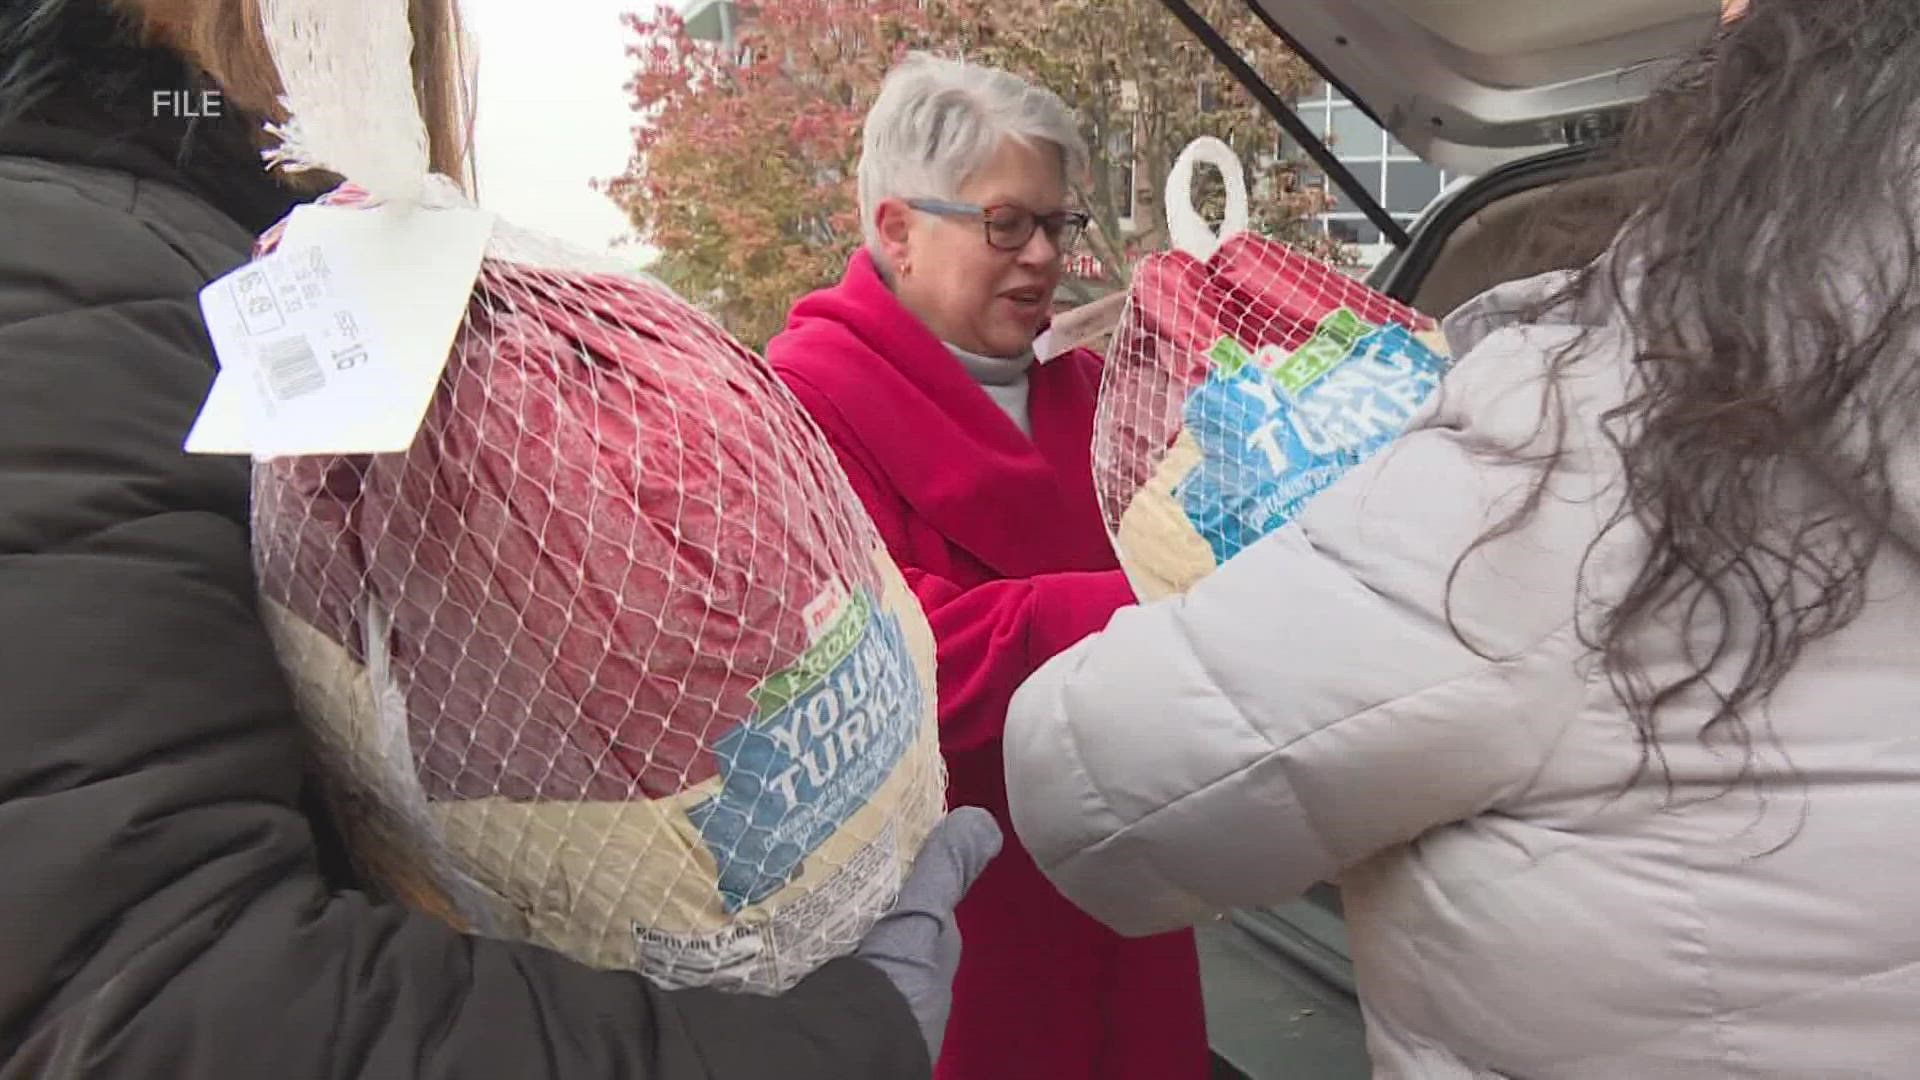 Last year, the goal was to collect 2,500 frozen turkeys. But the West Michigan community blew that goal out of the water.